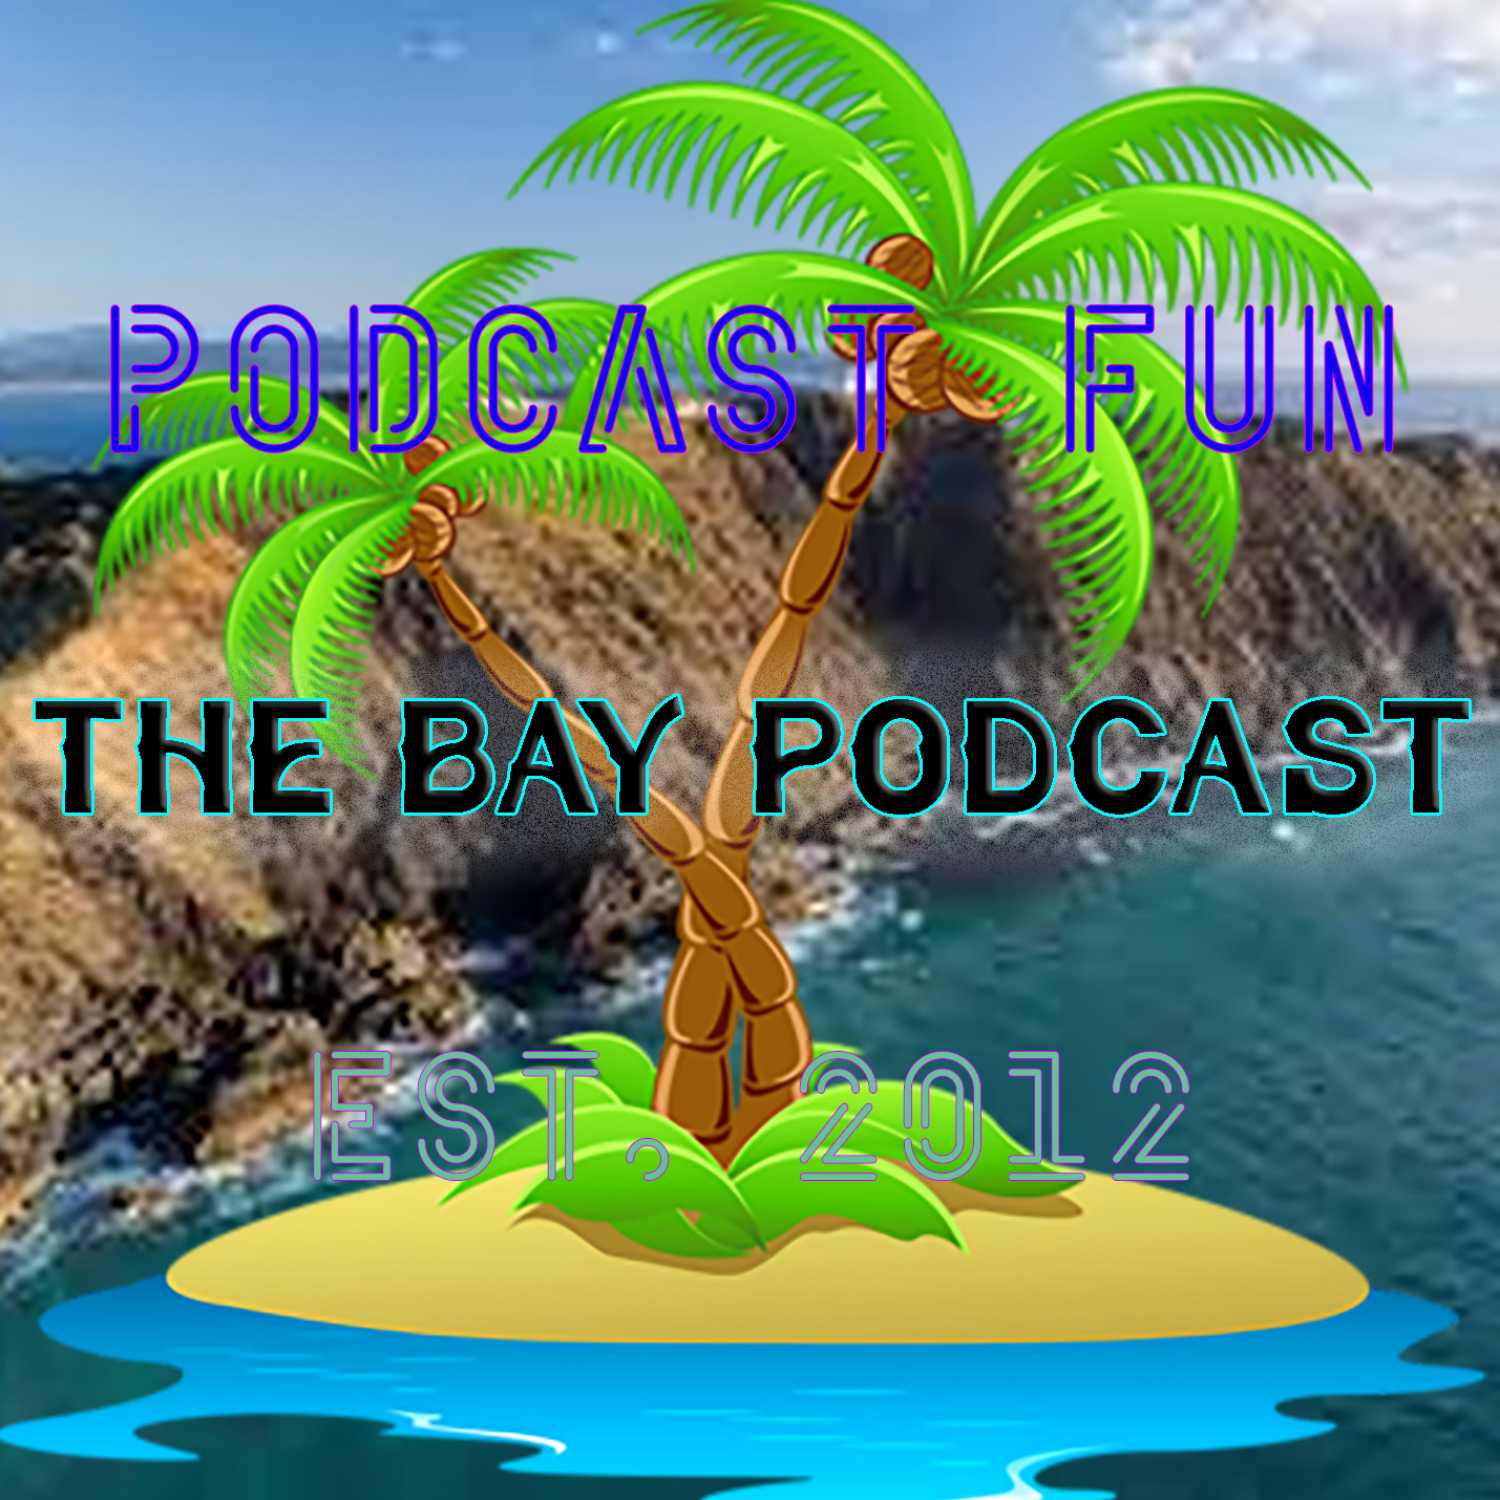 The Bay Podcast